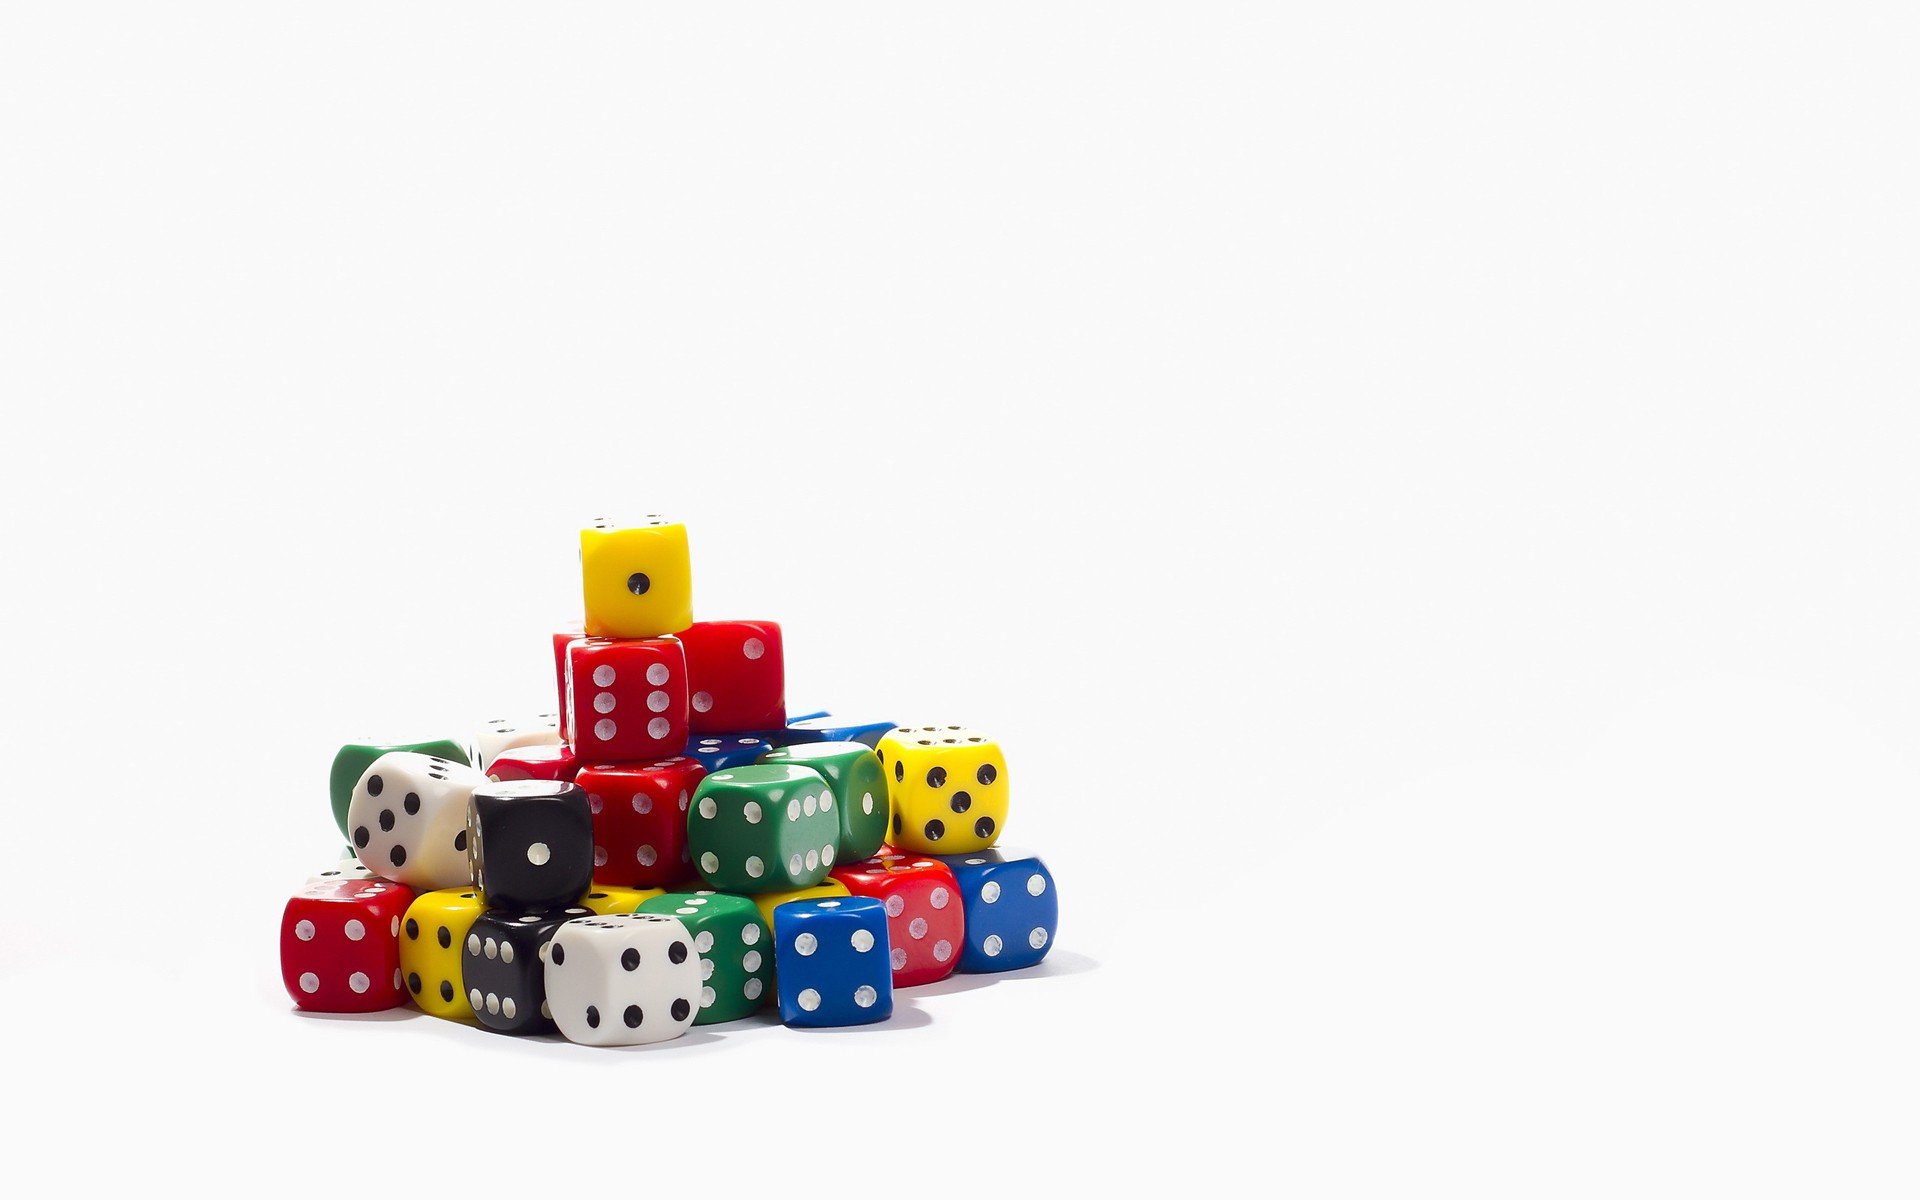 cube, Minimalism, Dice, White background, Colorful Wallpaper